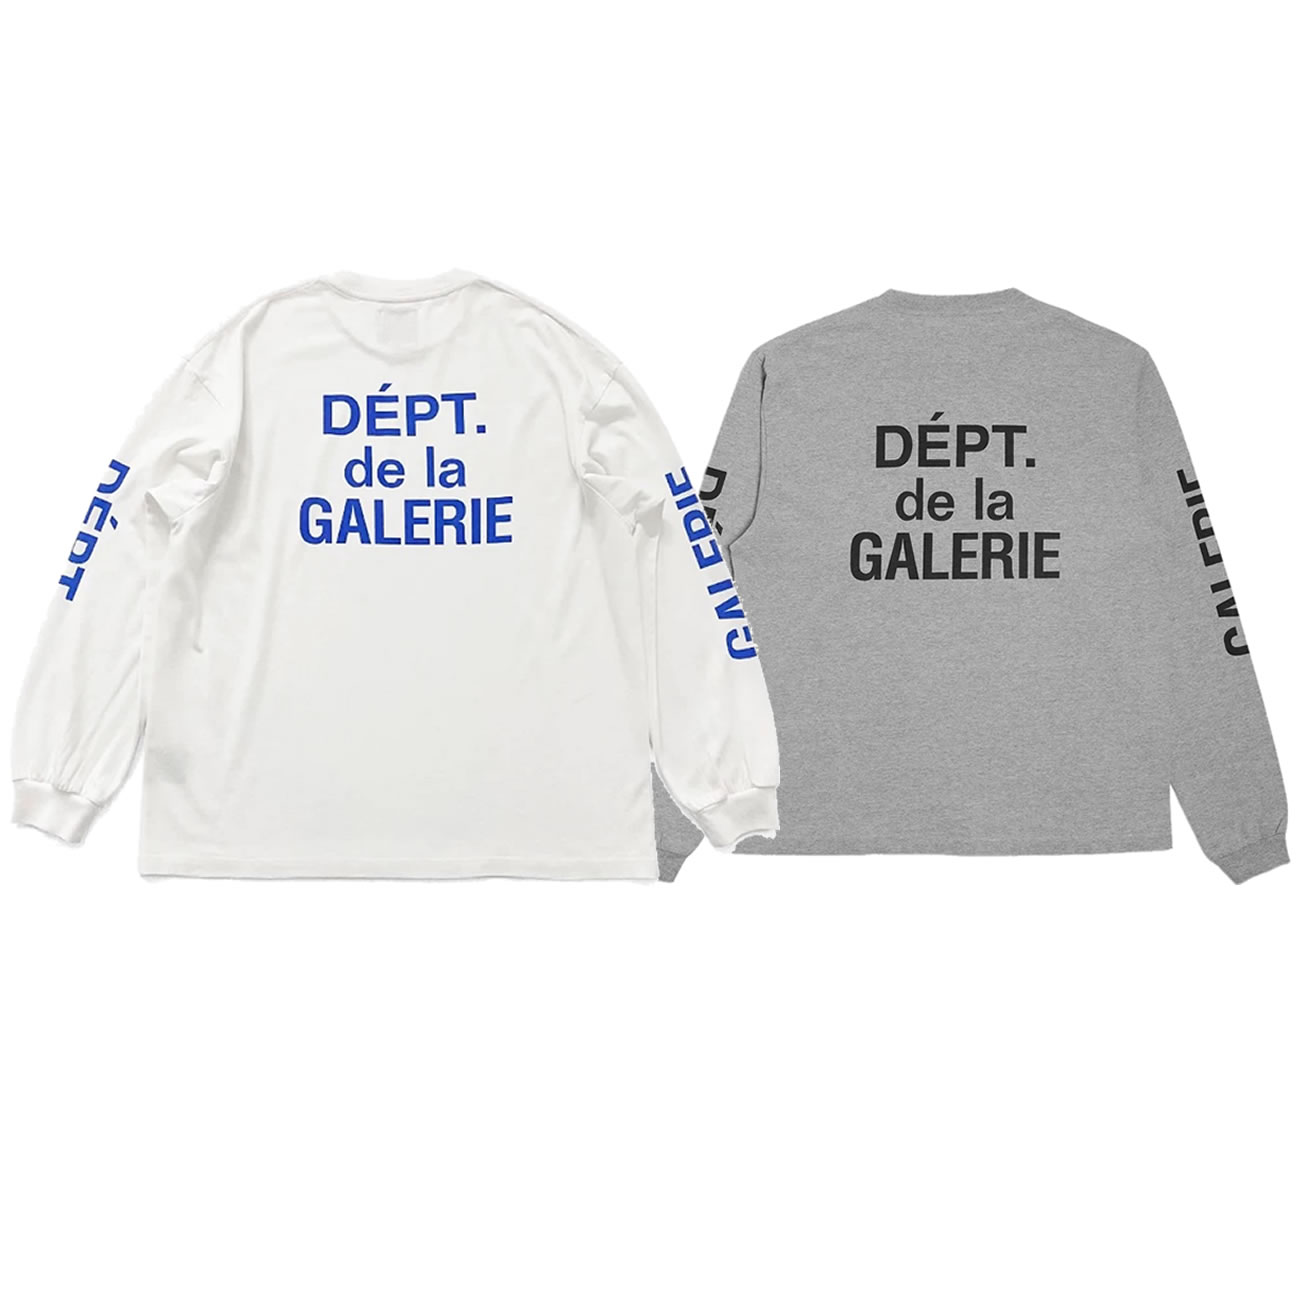 Gallery Dept. French Collector L S Tee White Blue Fw21 (9) - newkick.org